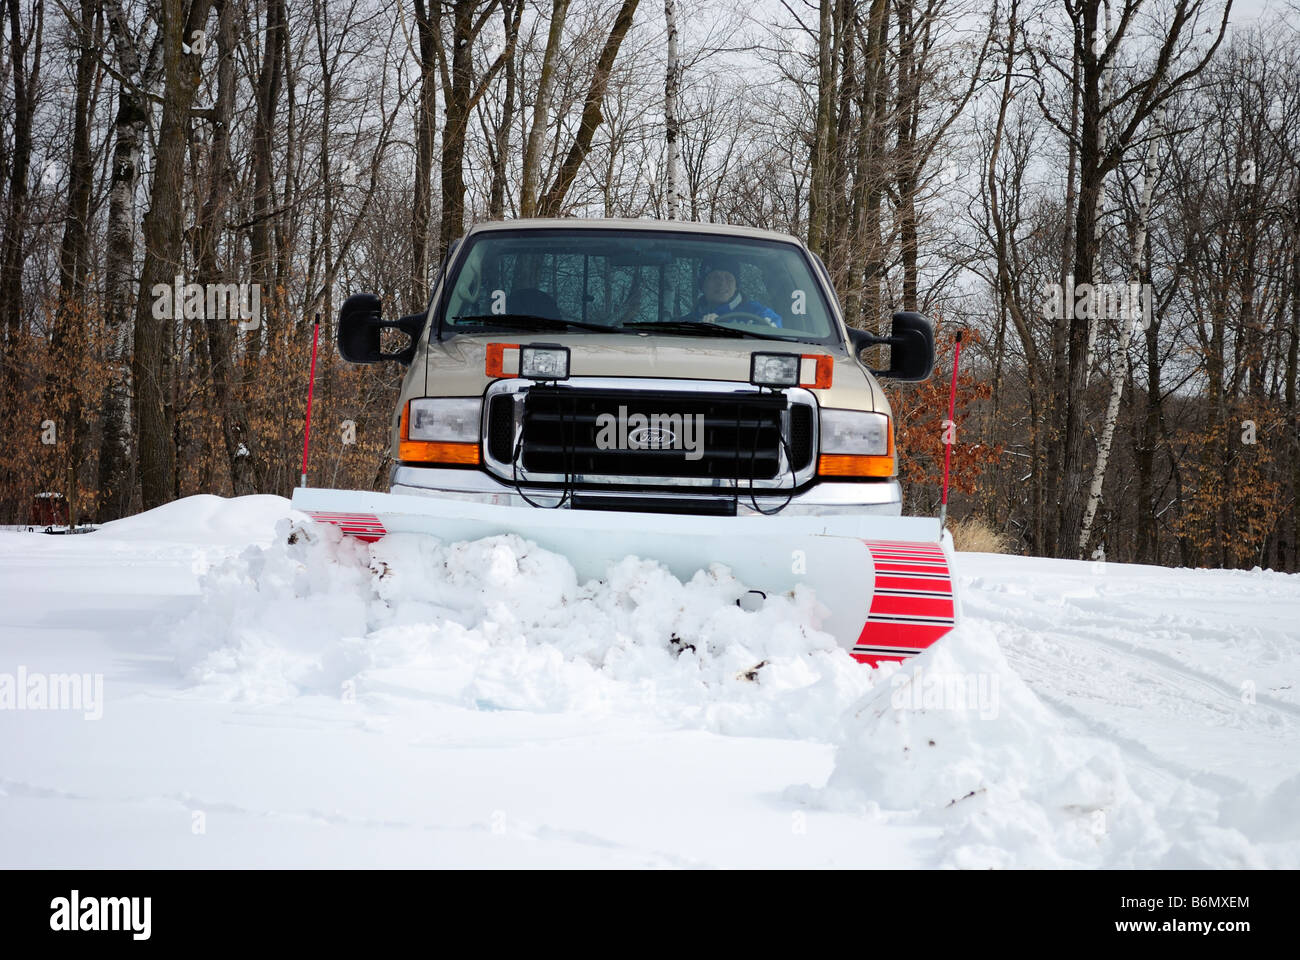 Plowing snow with a pickup truck Stock Photo